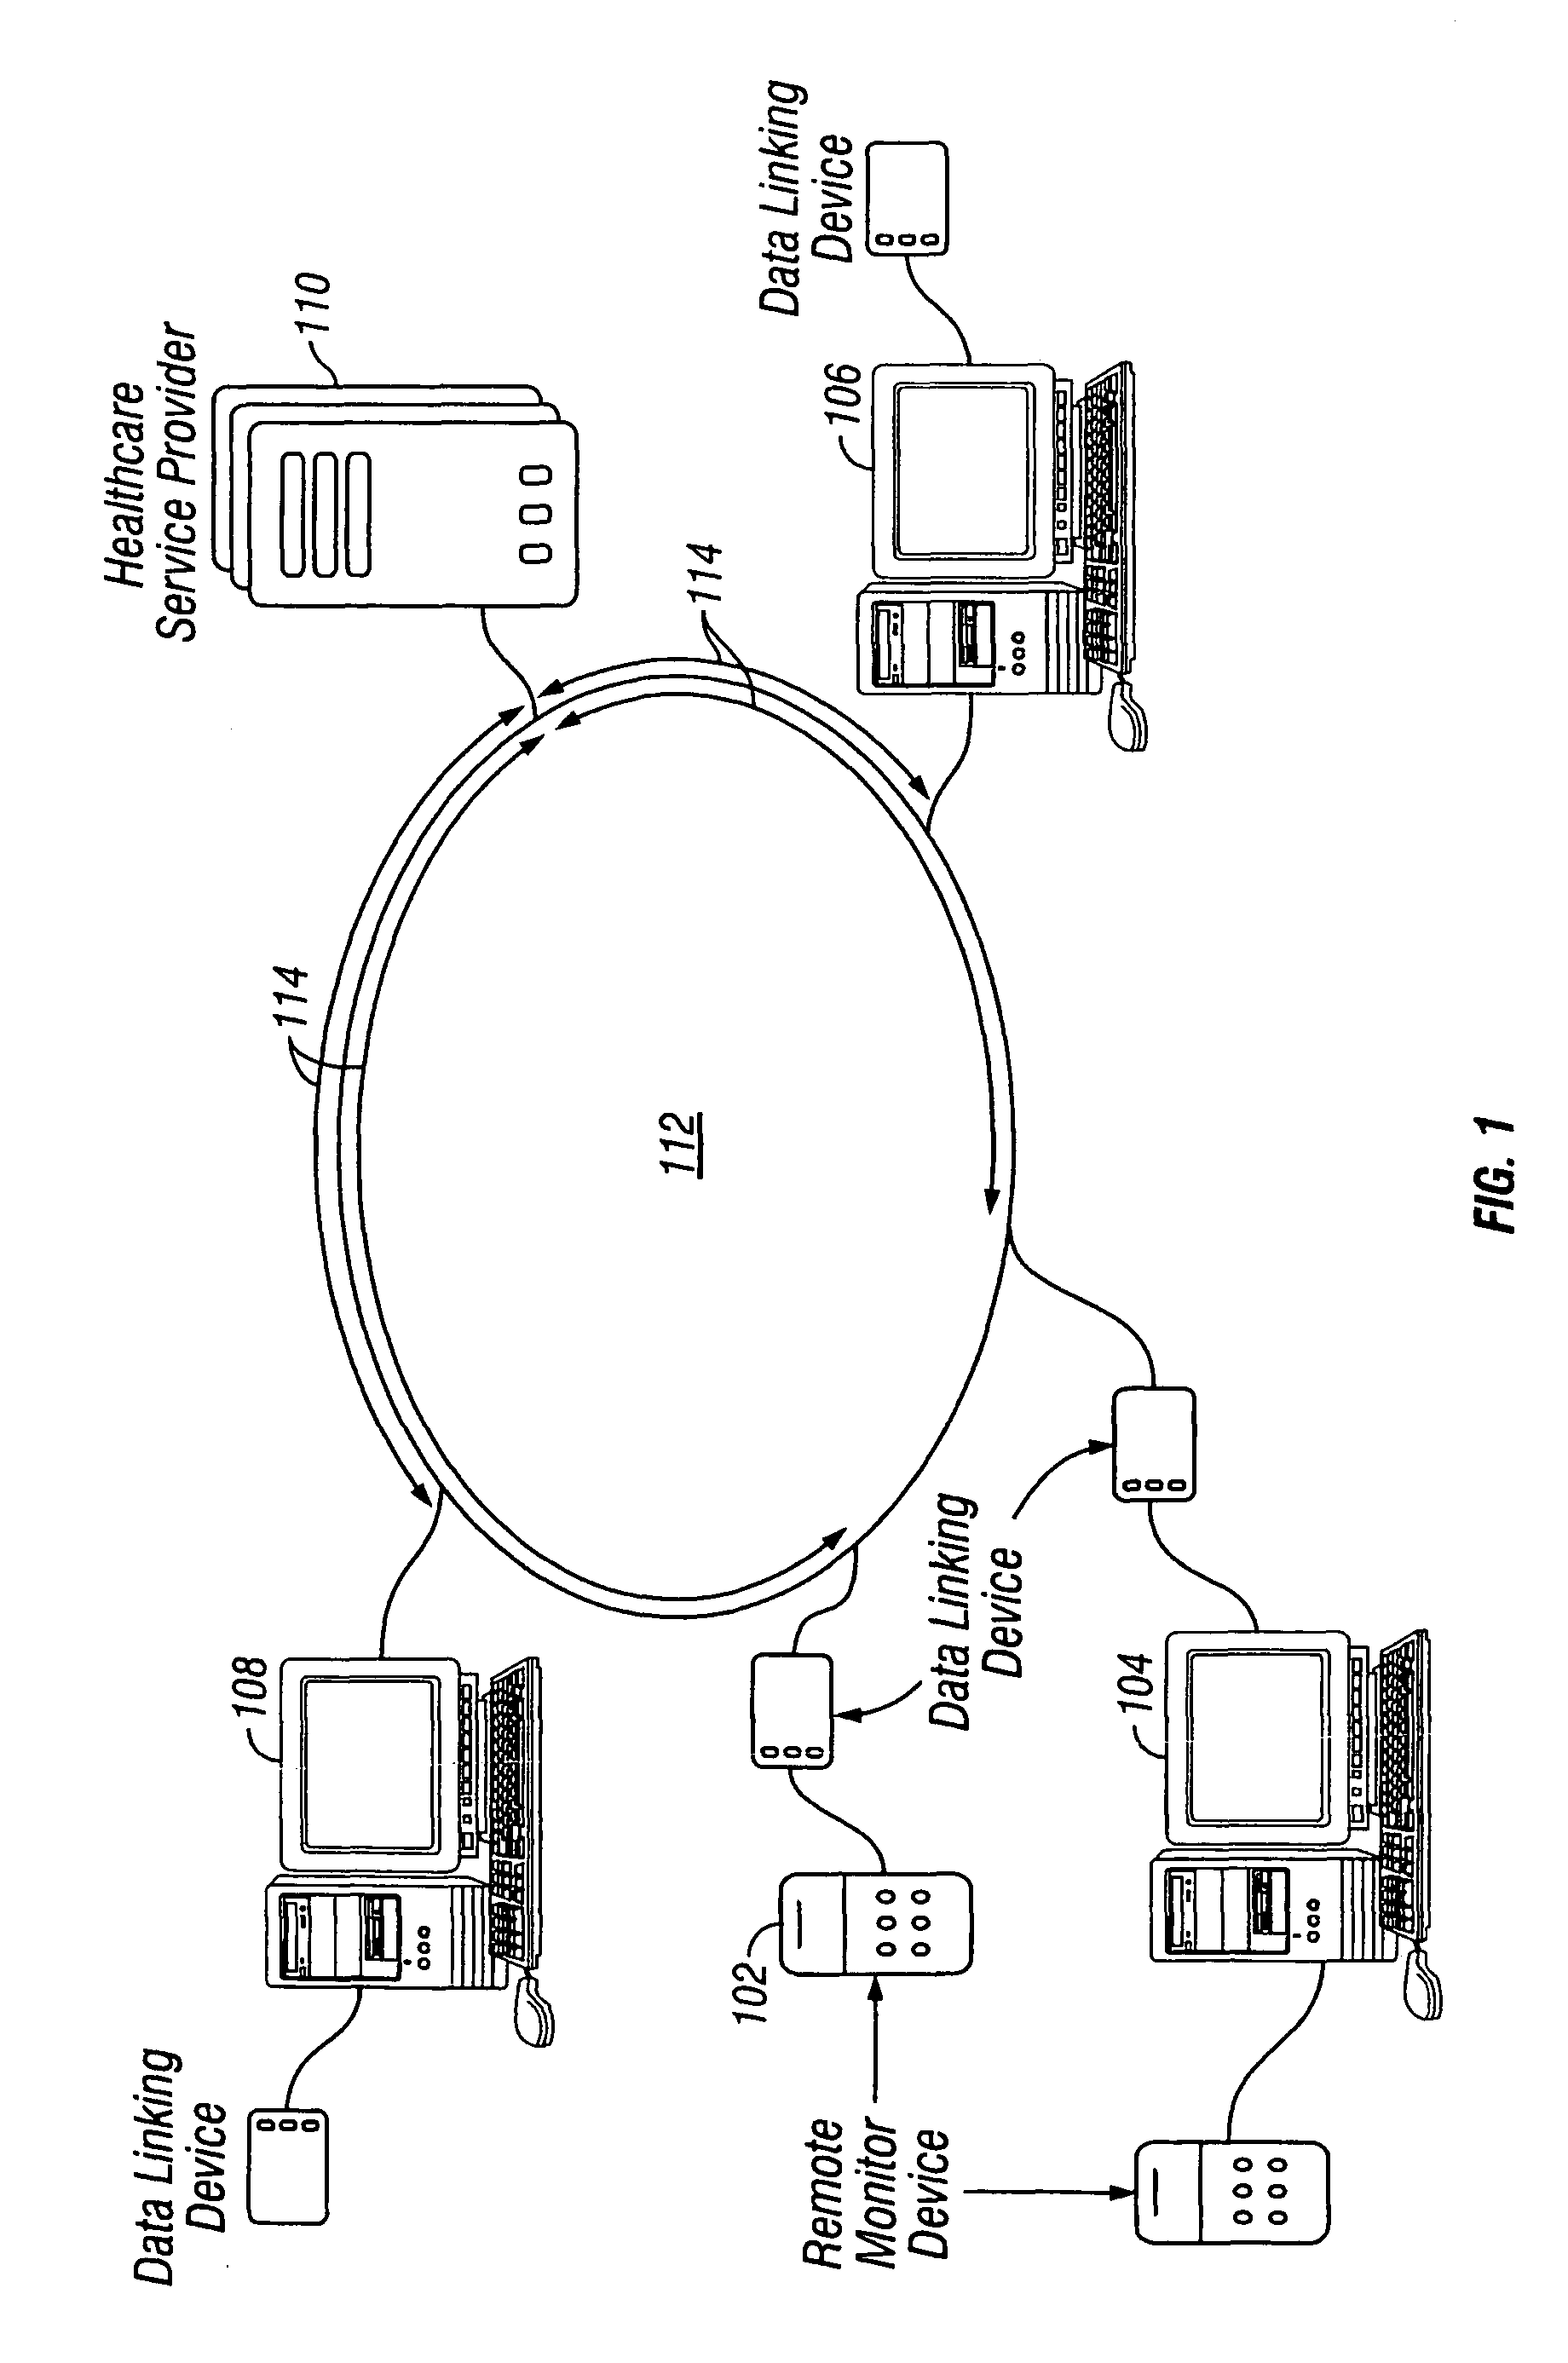 Method and system for communication and collaboration between a patient and healthcare professional